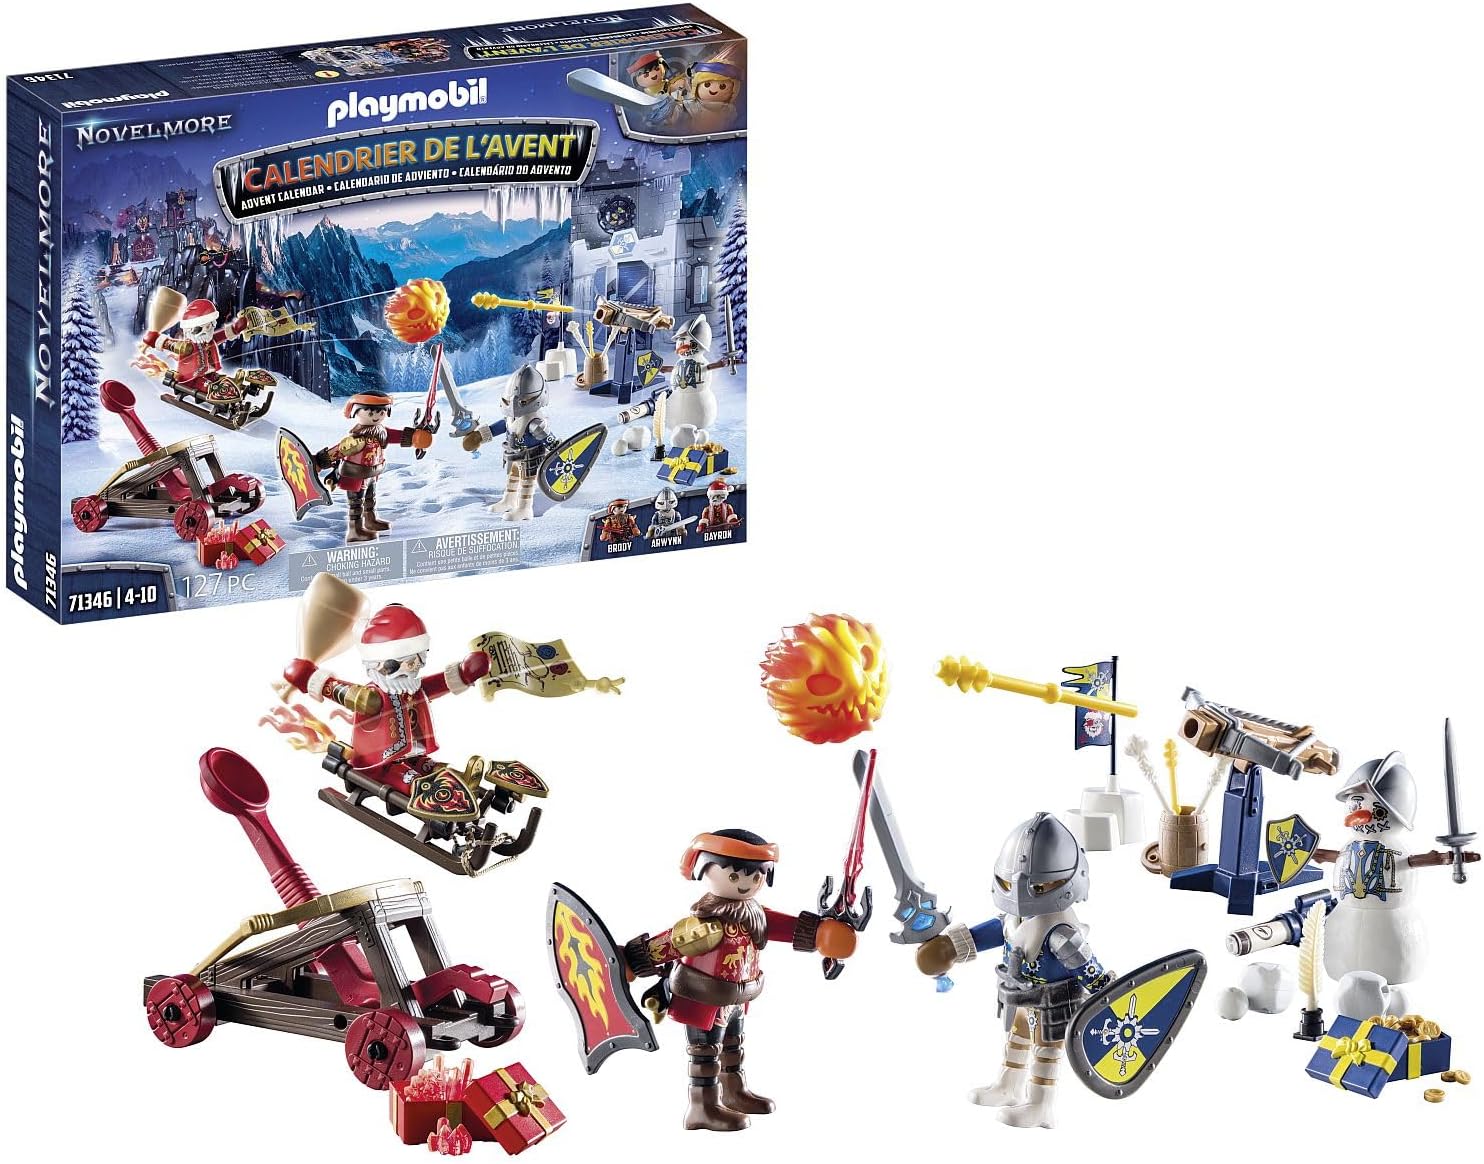 PLAYMOBIL Novelmore Advent Calendar 71346 Fight in the Snow, Advent Calendar for Knight Fans with Novelmore Figures, Advent Season Full of Surprises, Toy for Children from 4 Years